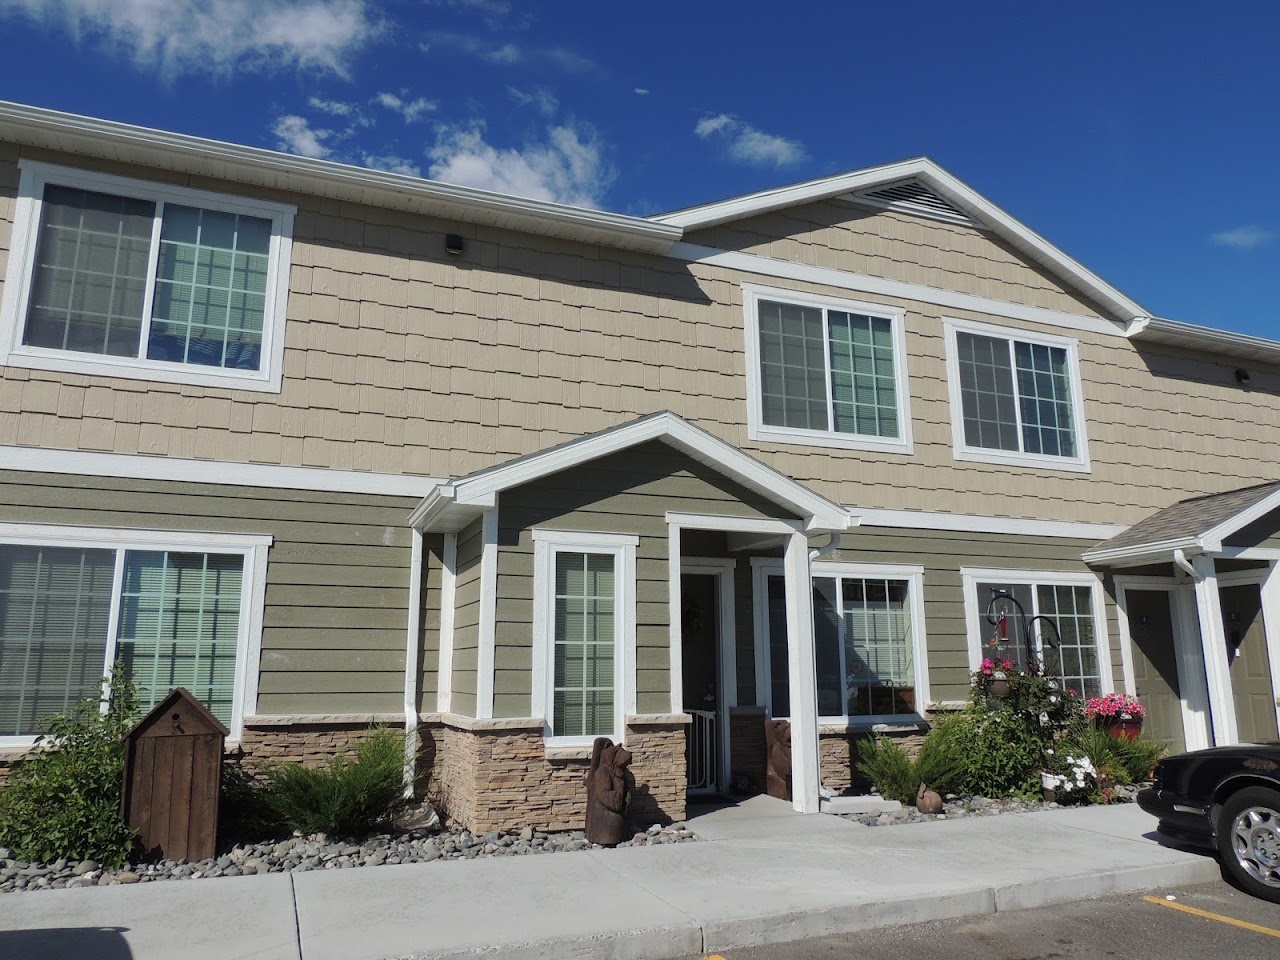 Photo of CEDAR BLUFF APARTMENTS. Affordable housing located at 2732 COUGAR AVENUE CODY, WY 82414